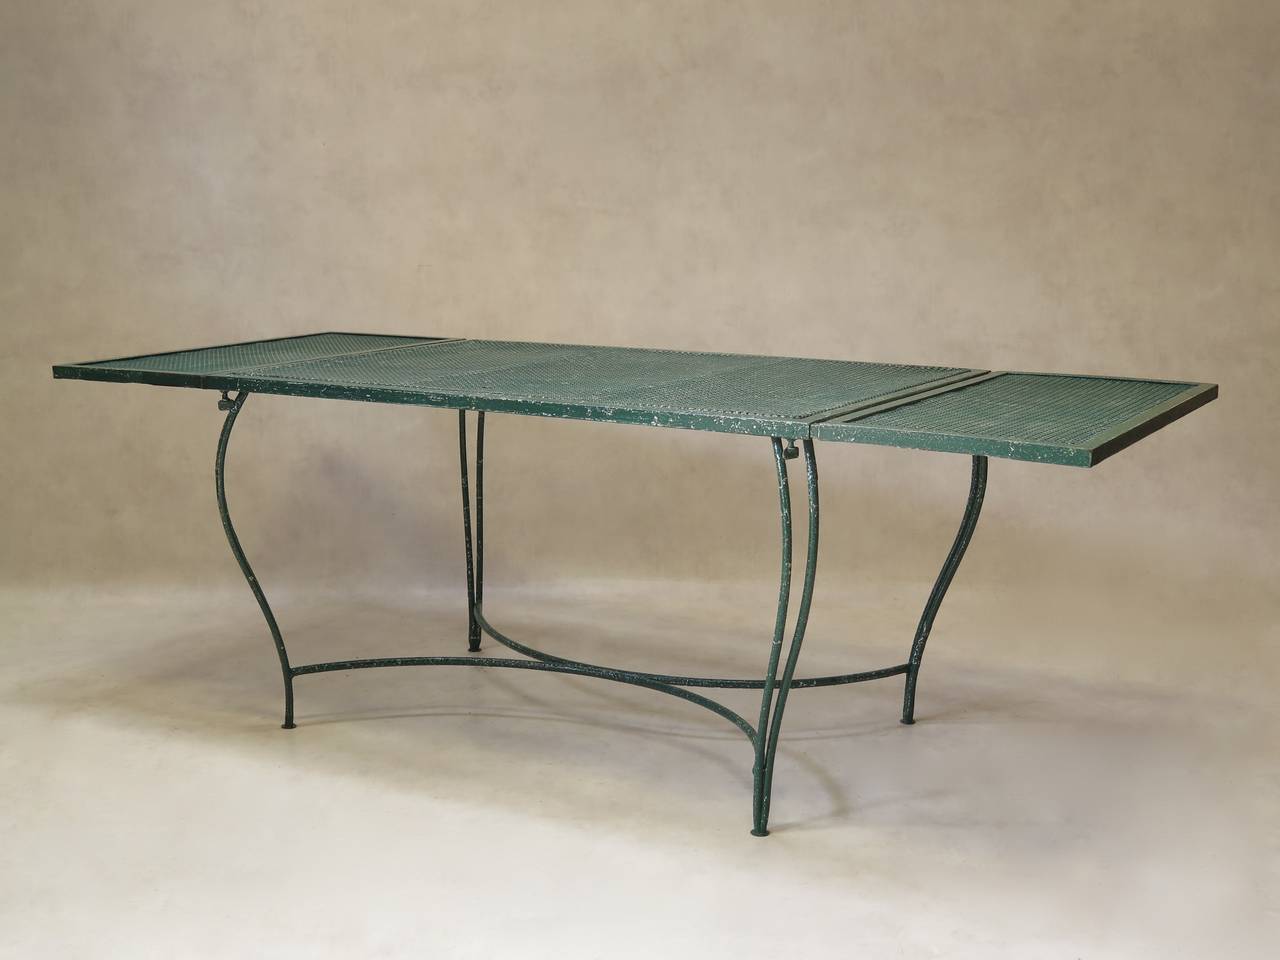 Charming wrought iron dining table, with extensions (fixed) on either end of the central table top, made out of cloverleaf-patterned sheet metal, with a two-centimeter wide frame around the contours. Raised on double tapering cabriole legs, joined